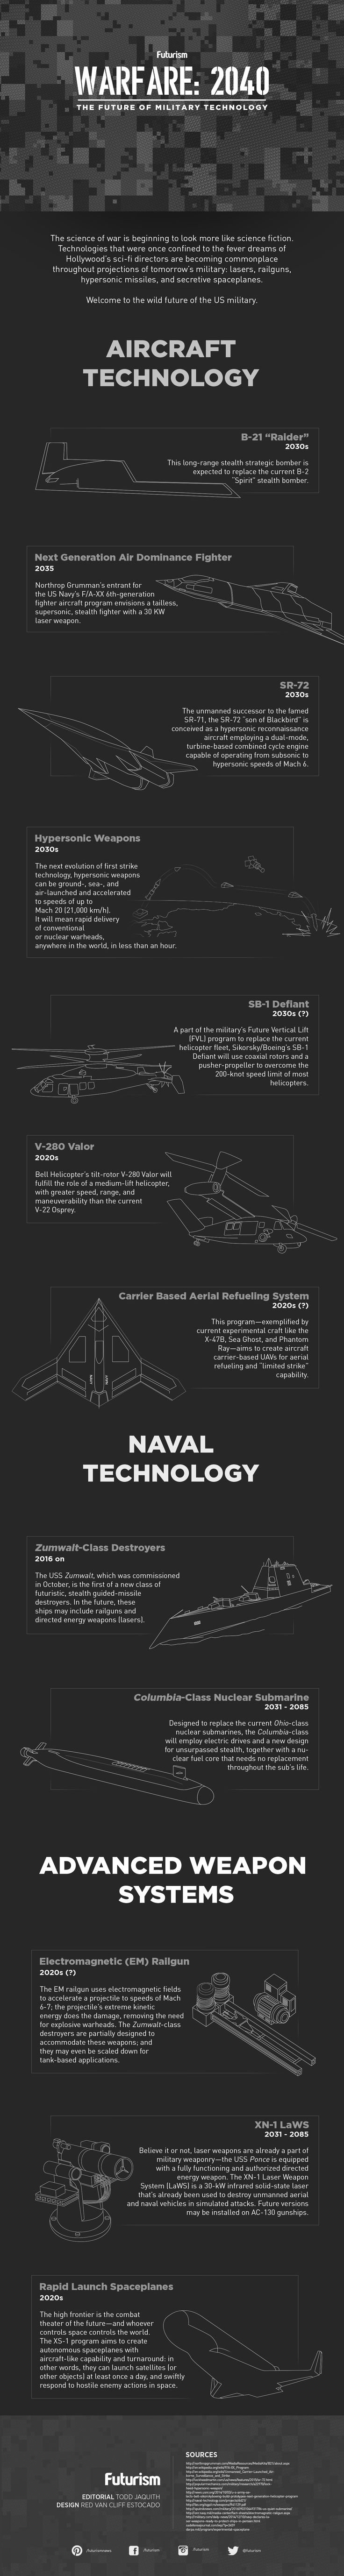 The Future Of Military Technology #Infographic #Military #Technology